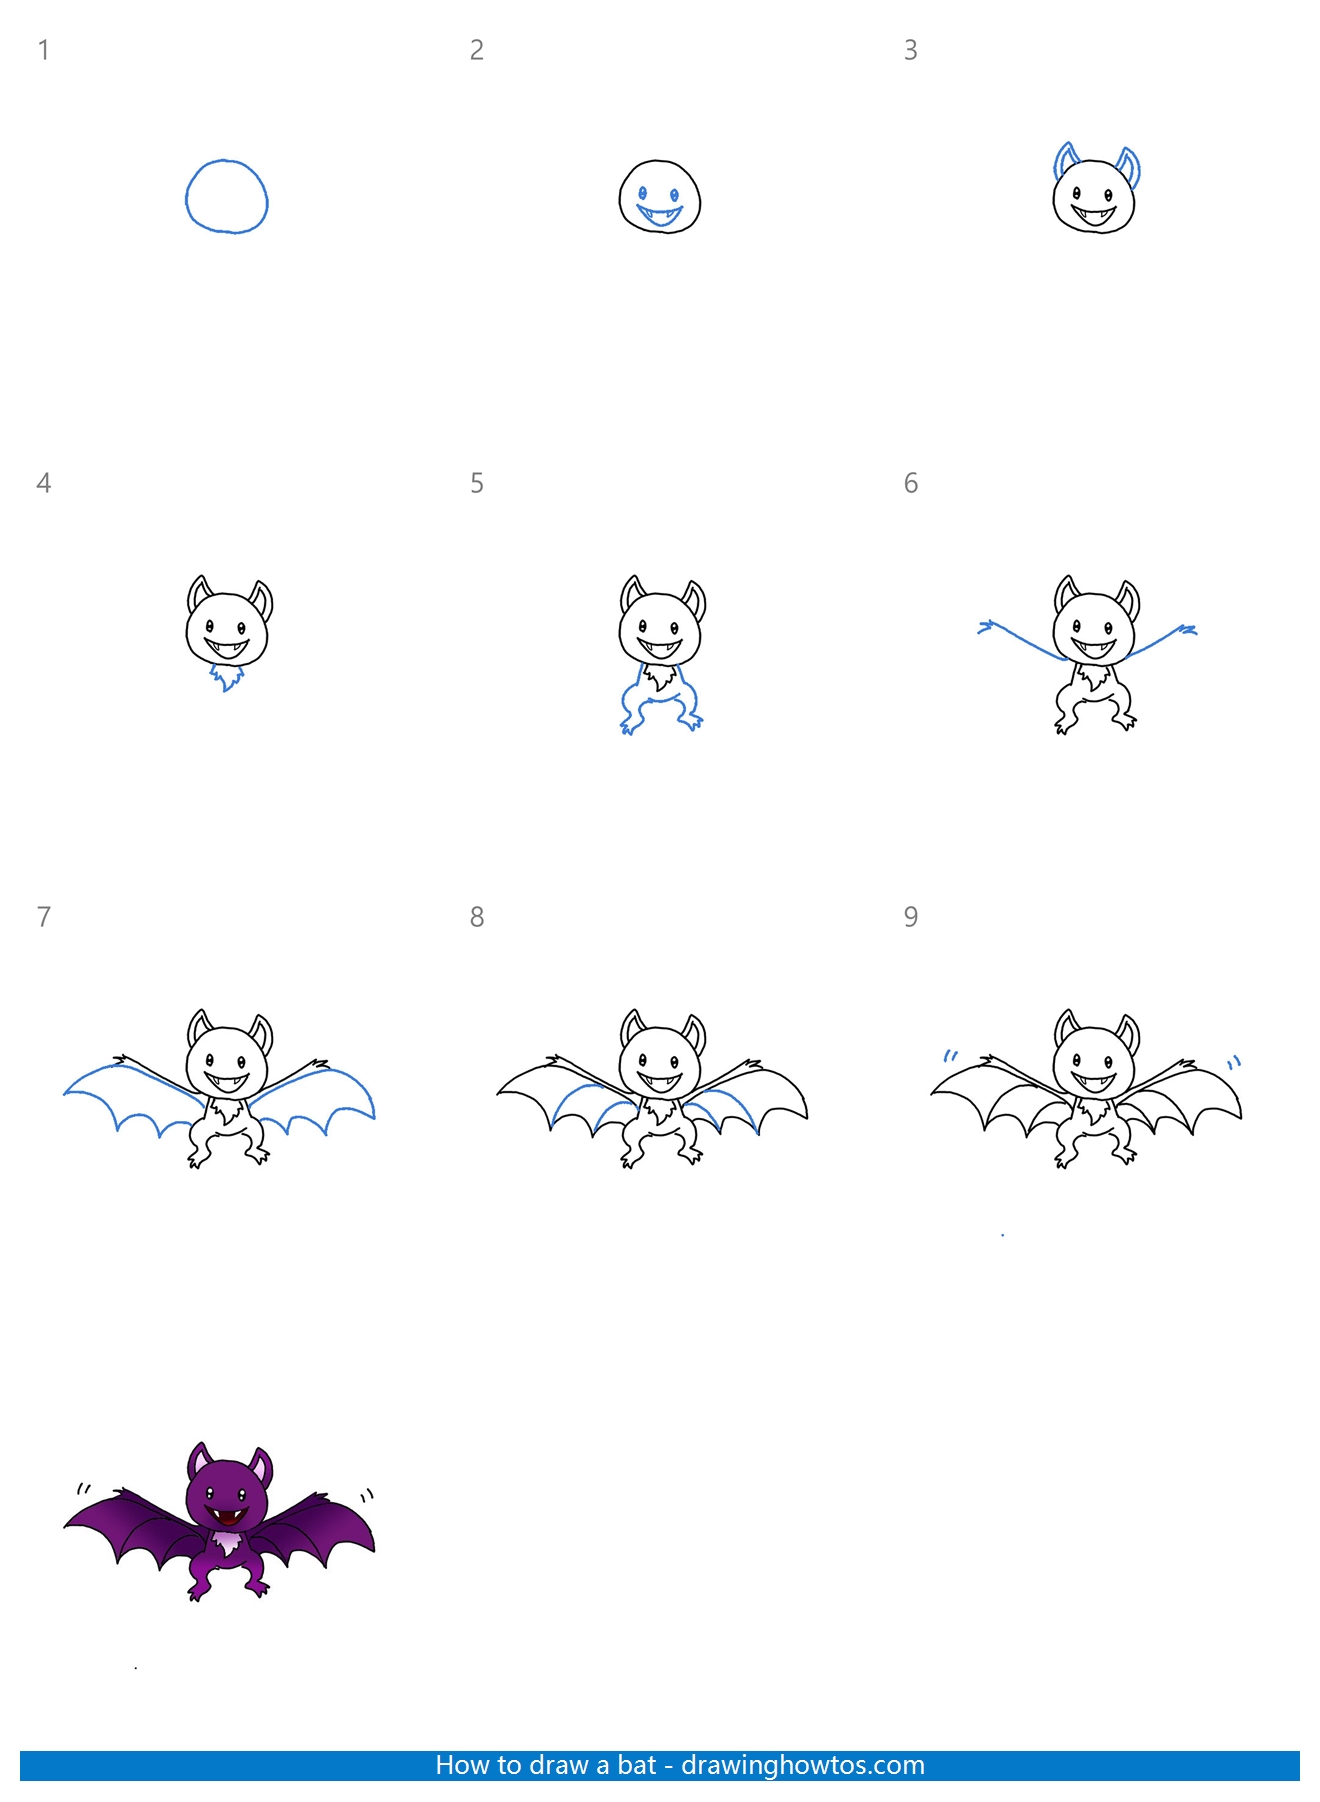 How to Draw a Flying Bat Step by Step